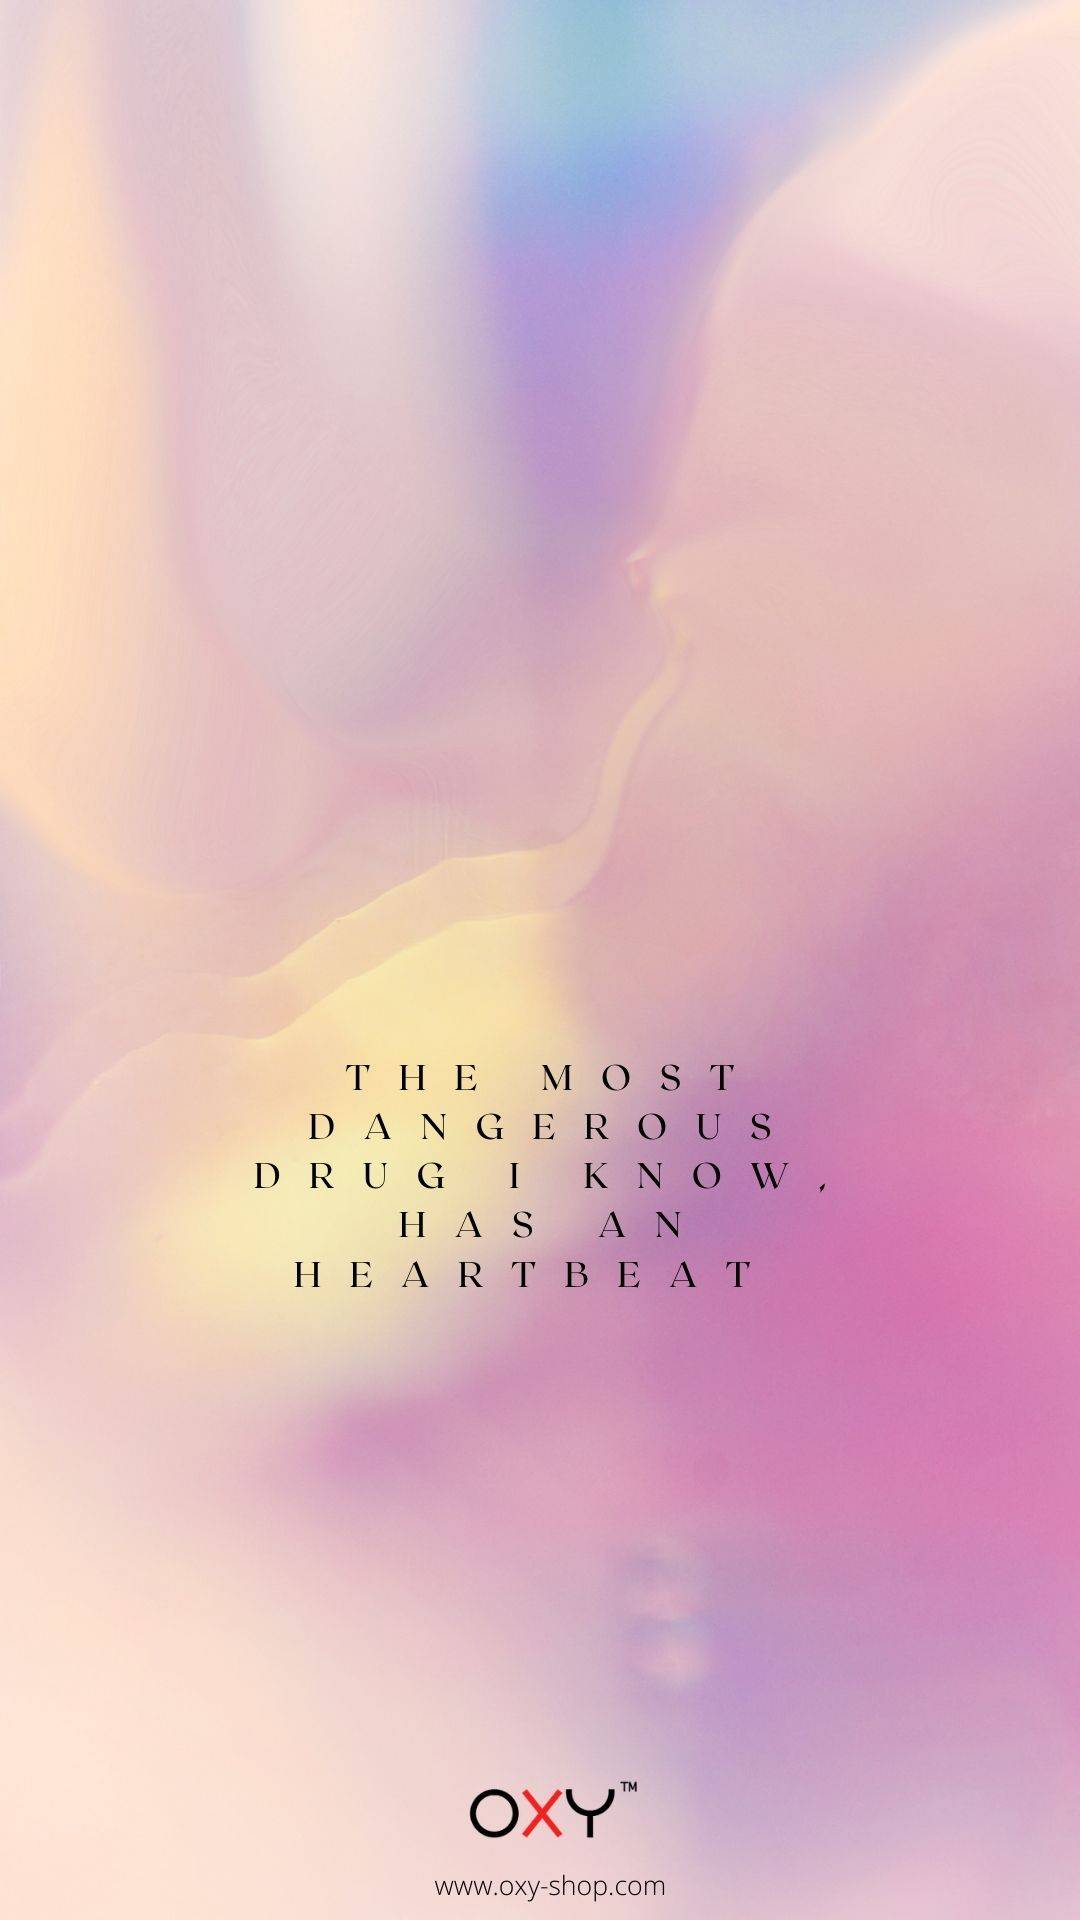 The most dangerous drug I know has an heartbeat. - BDSM wallpaper